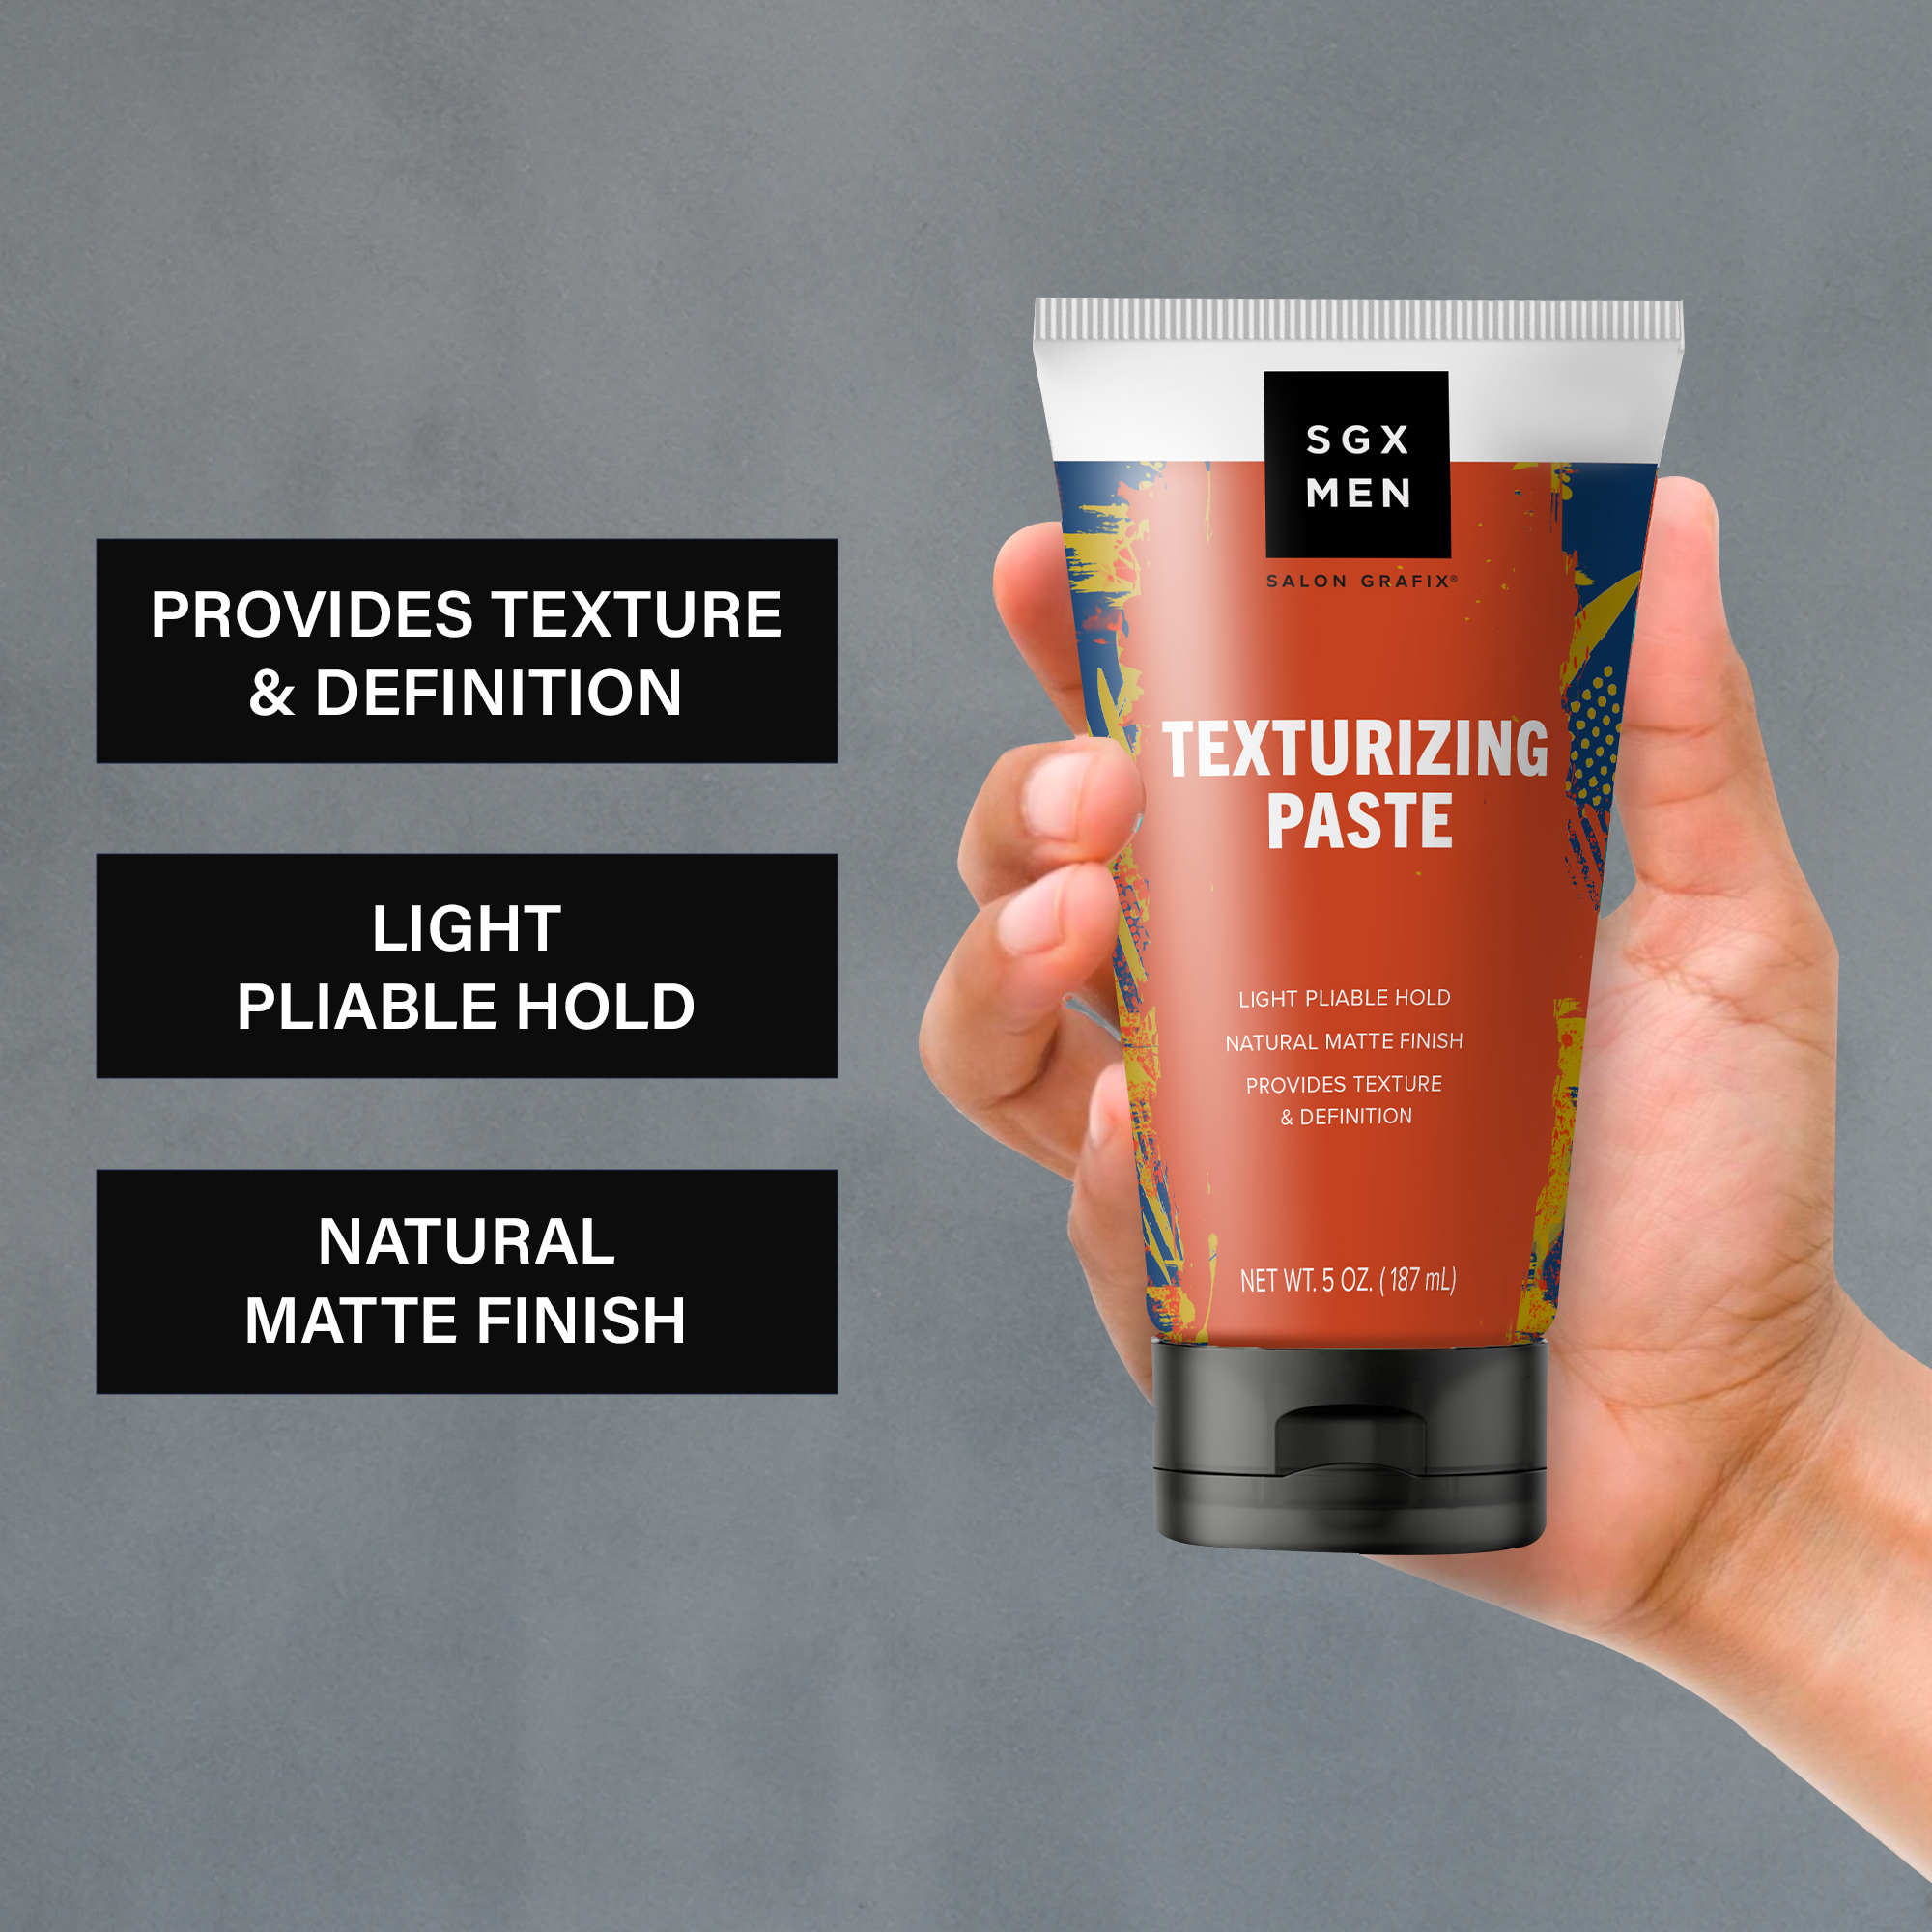 SGX NYC Men's Texturizing Paste, for All Hair Types, Light Hold, 5 oz - image 3 of 7